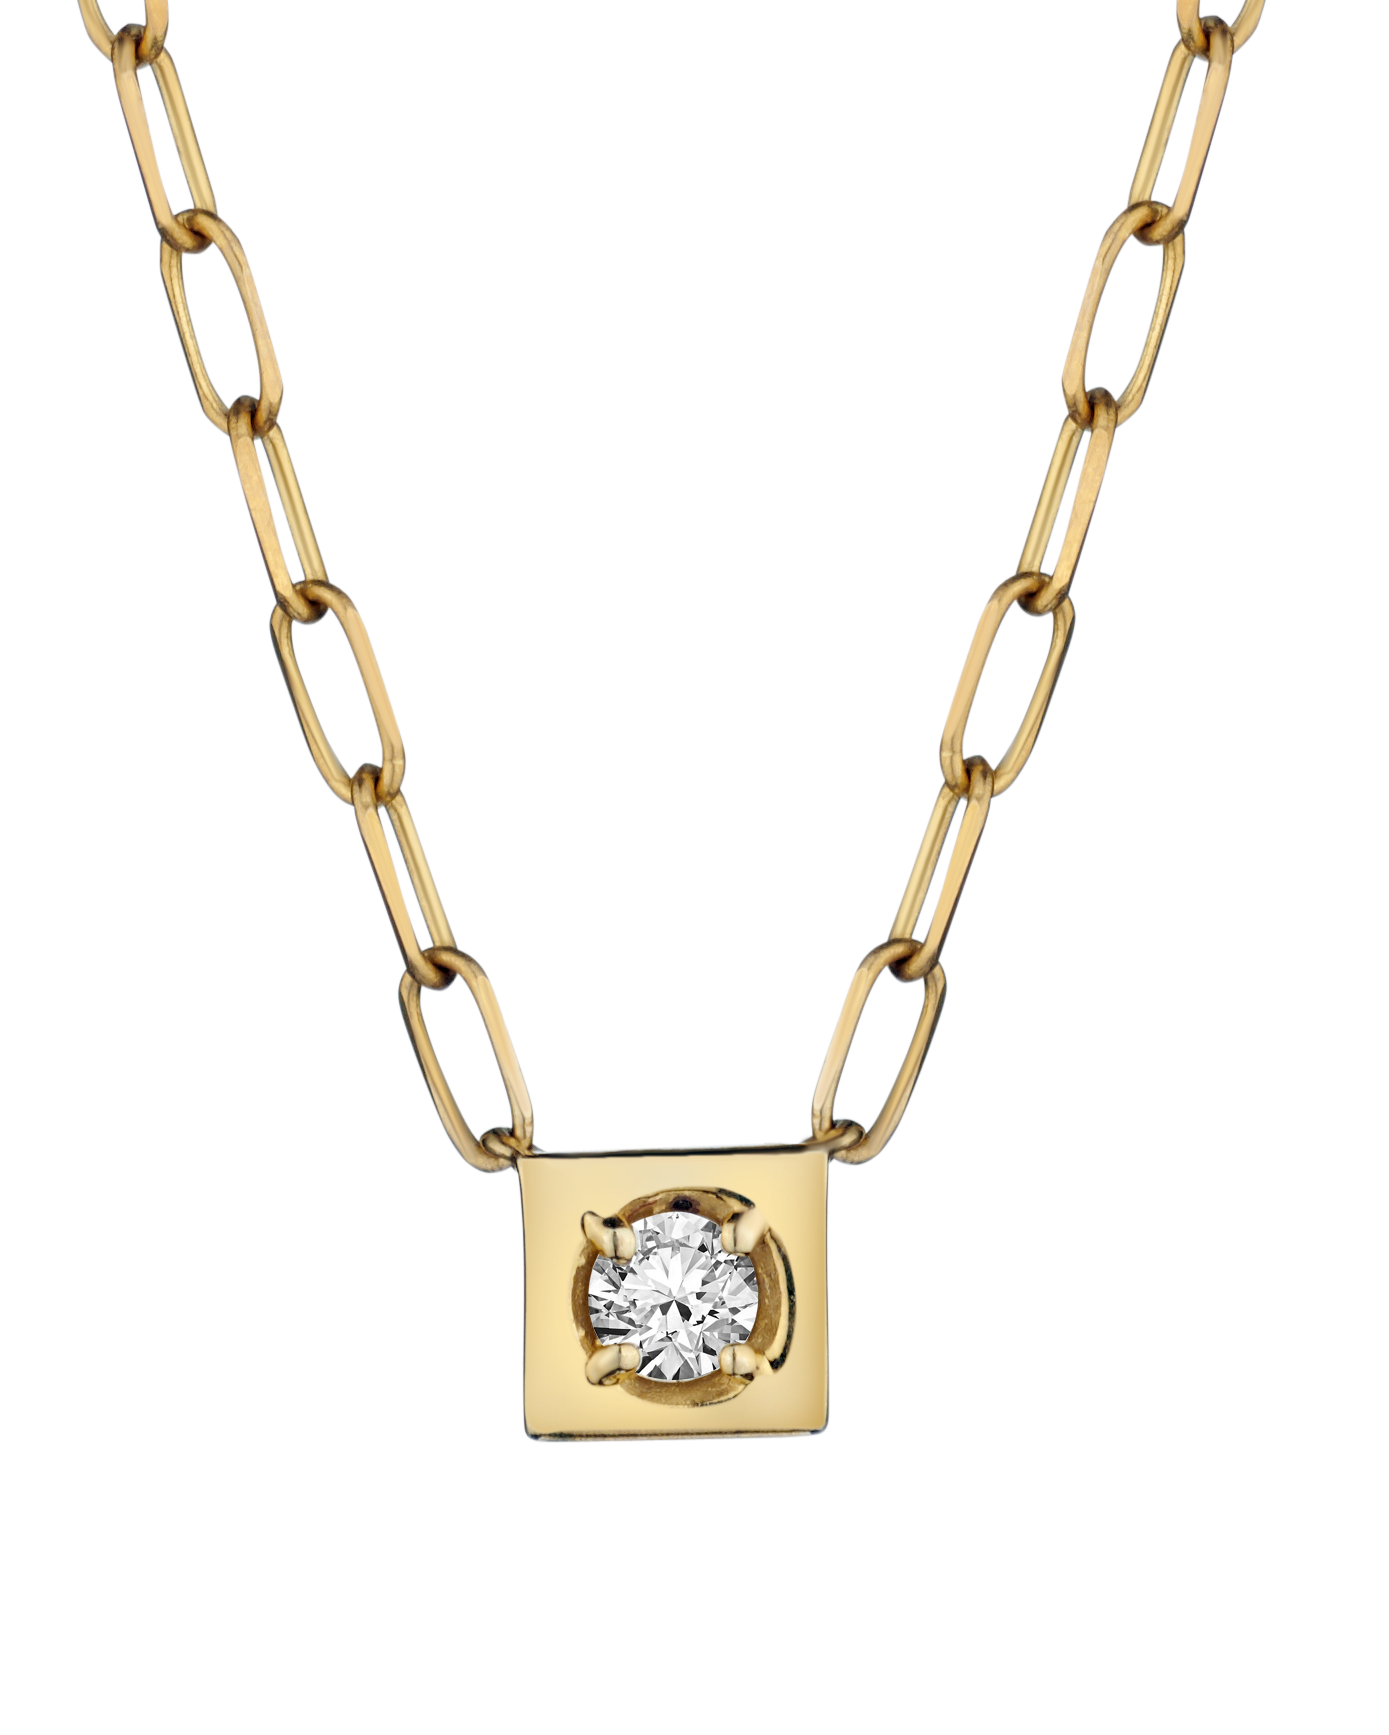 .10 Carat of Diamonds "Love Lock" Necklace, 14kt Yellow Gold.....................NOW